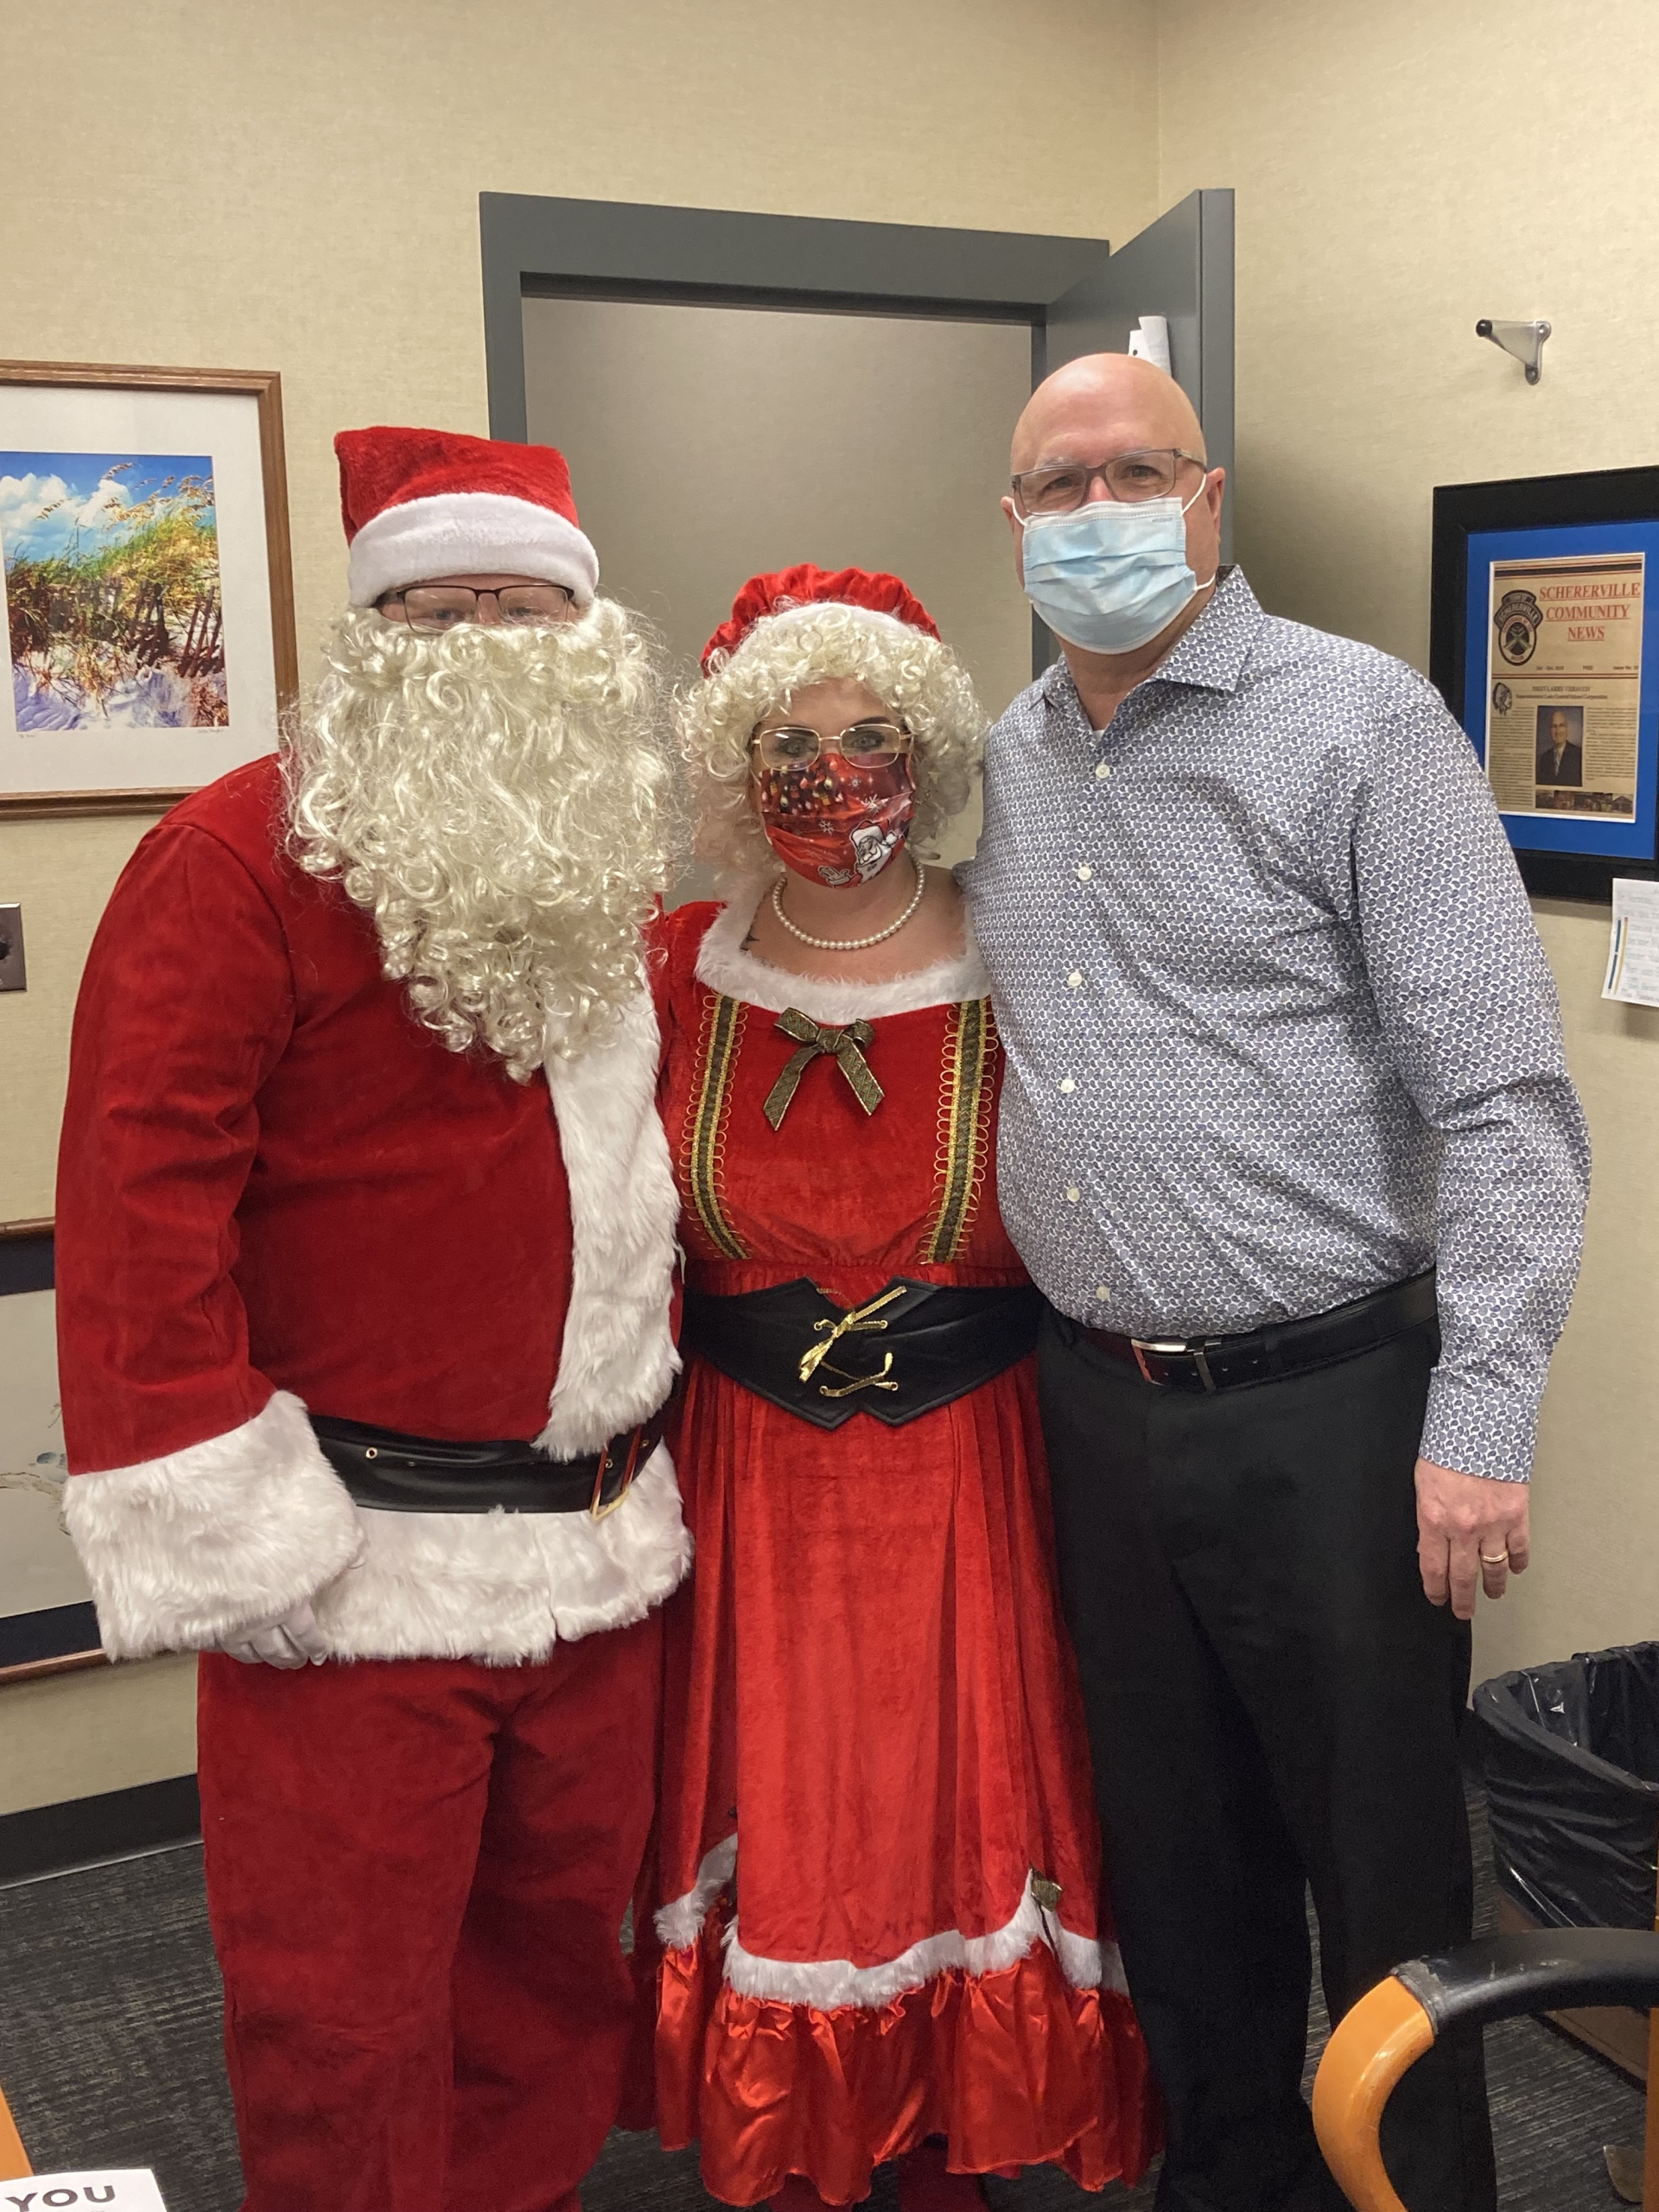 Mr and Mrs Claus came to visit Central Office and wished all a very Merry Christmas!